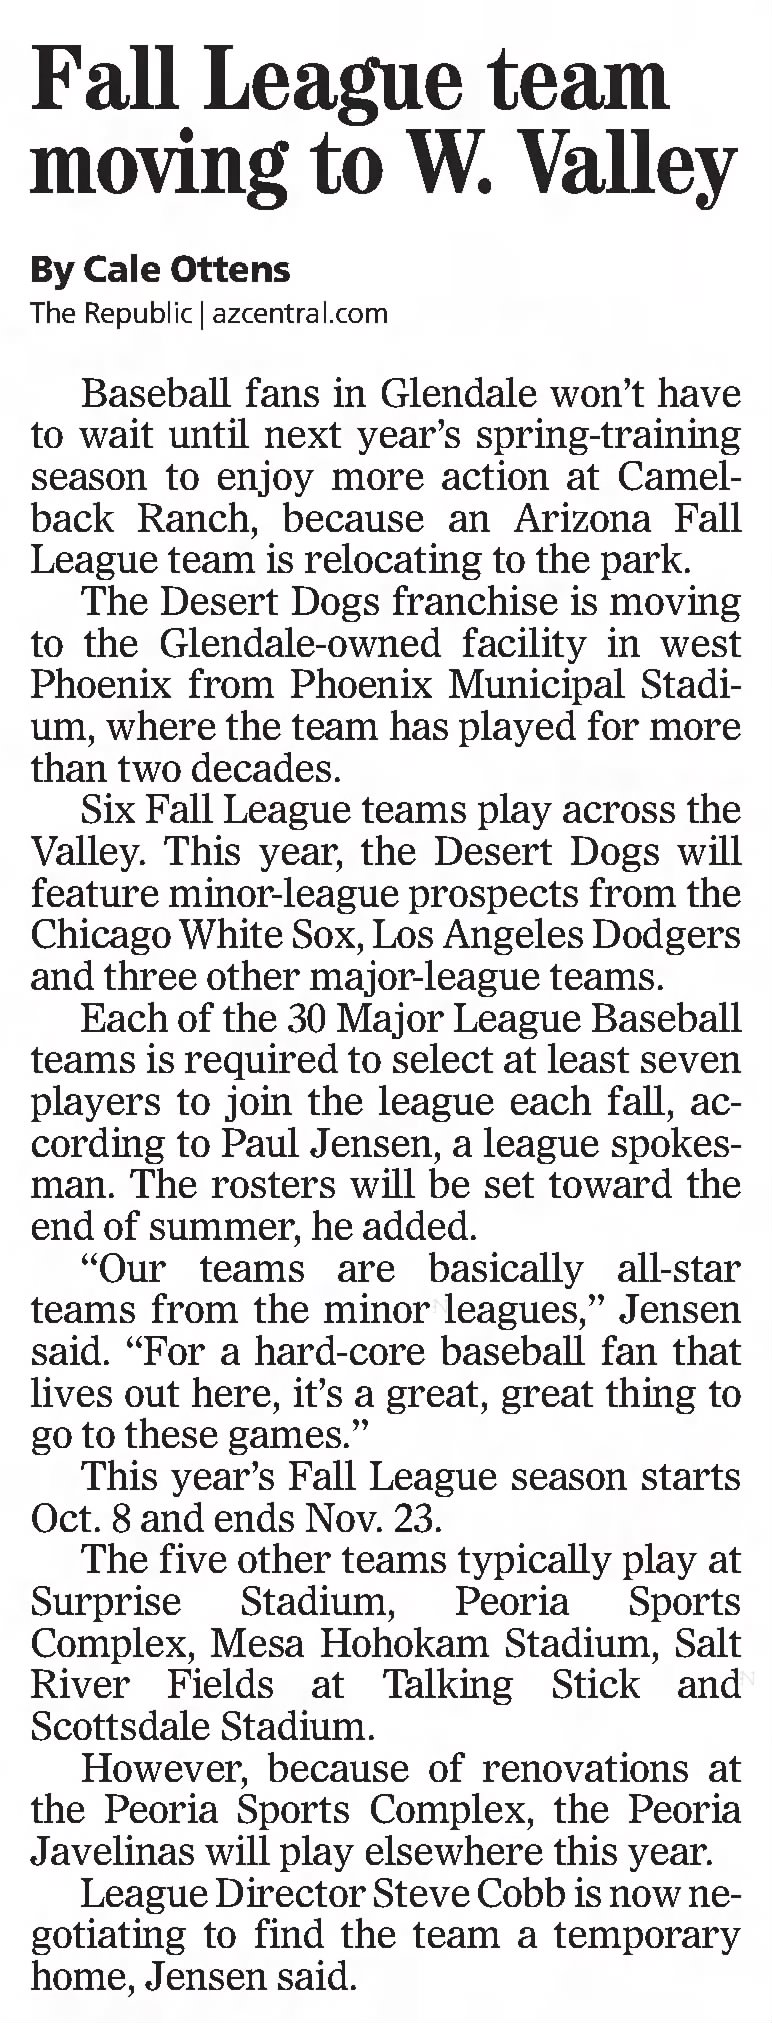 Fall League team moving to W. Valley